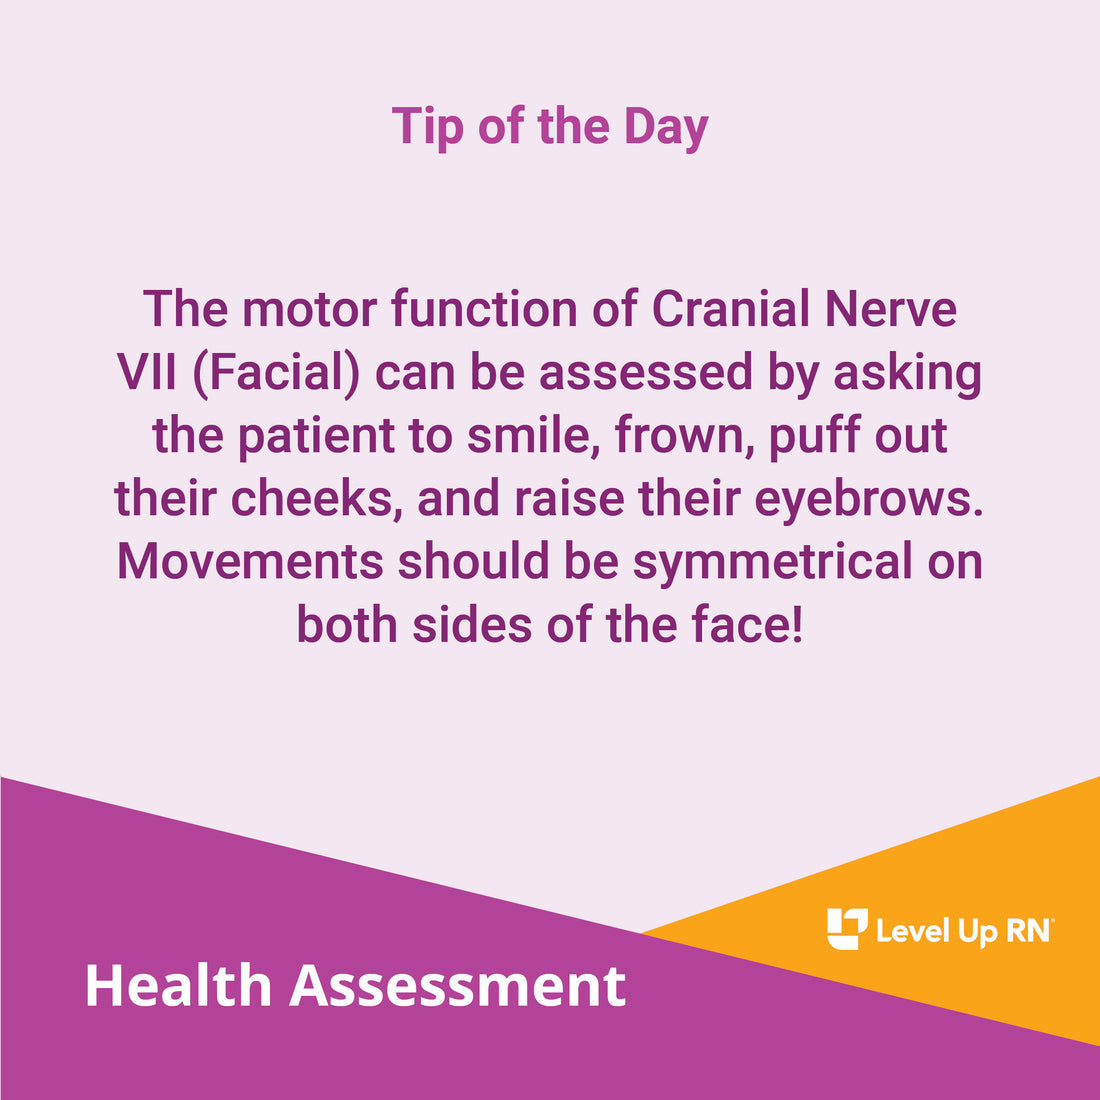 The motor function of Cranial Nerve VII (Facial) can be assessed by asking the patient to smile, frown, puff out their cheeks, and raise their eyebrows.